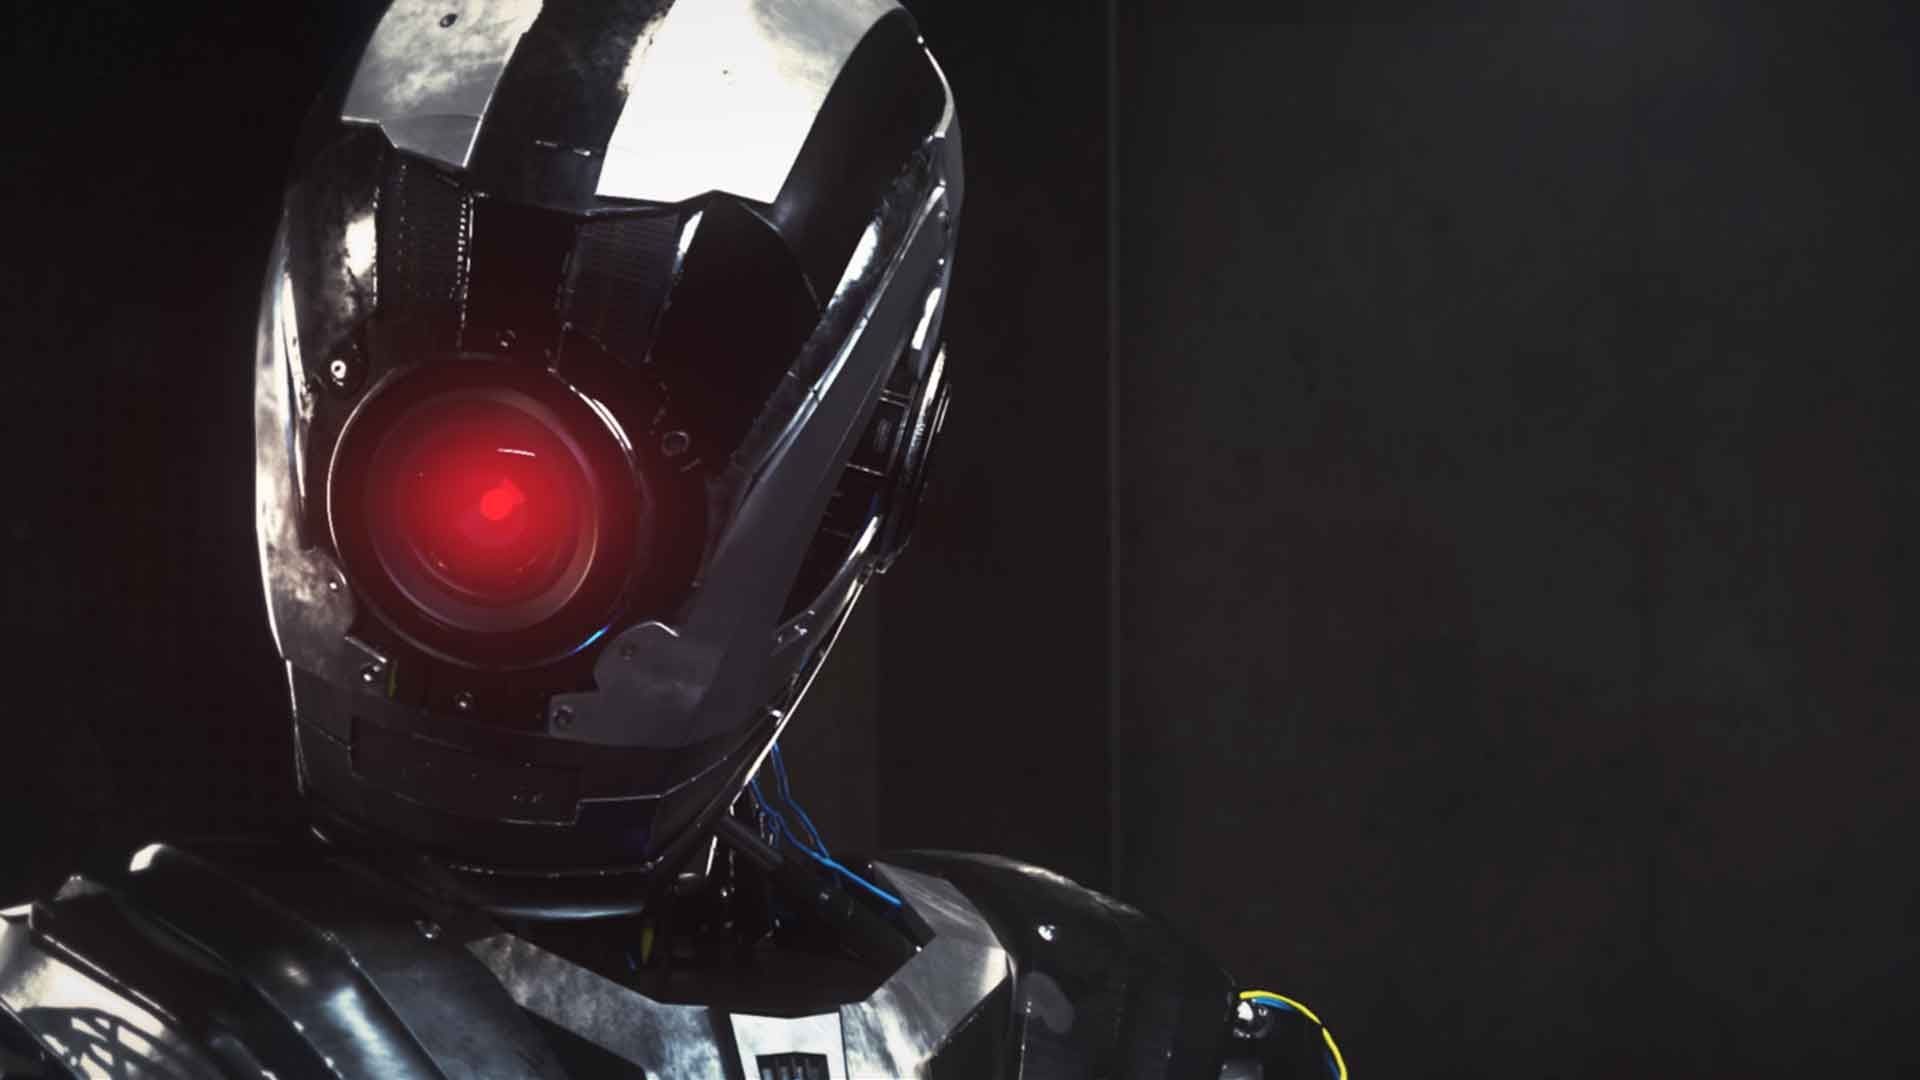 Animated robot like character against a dark background